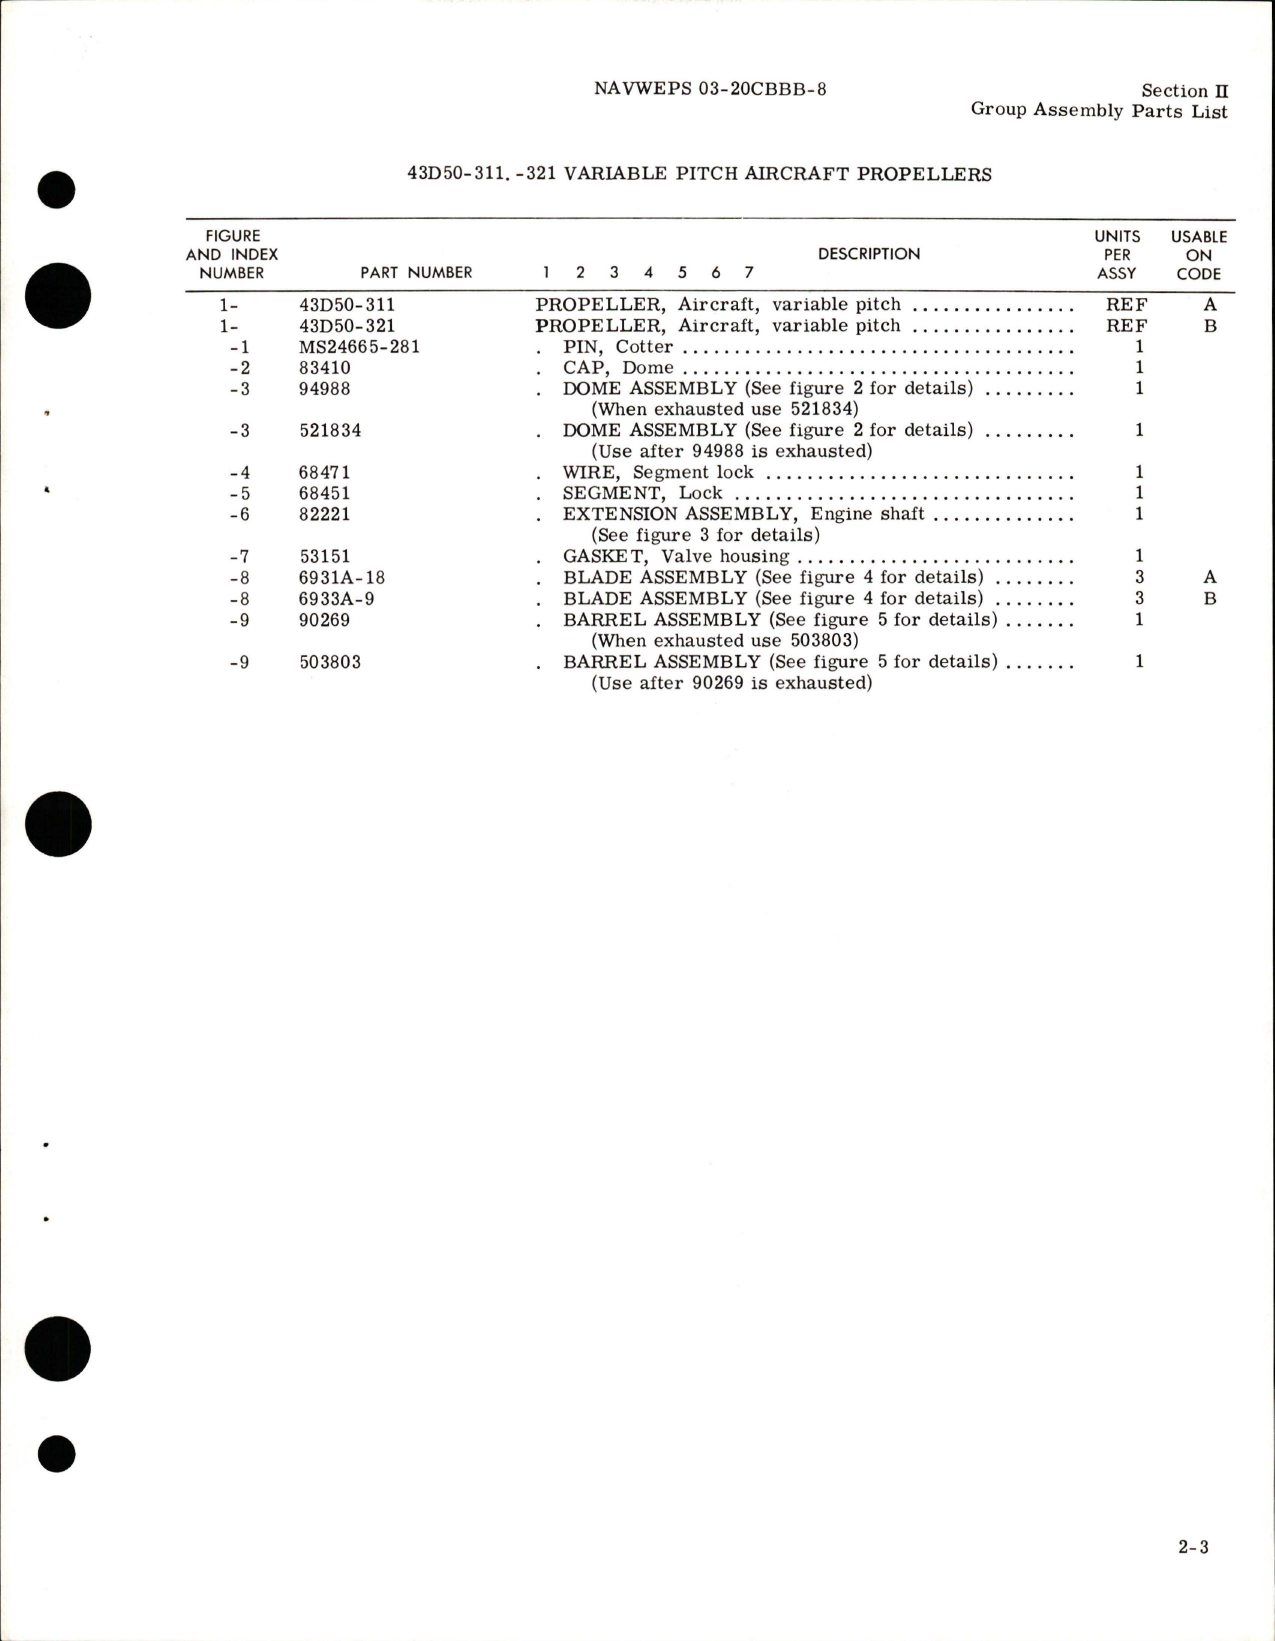 Sample page 9 from AirCorps Library document: Illustrated Parts Breakdown for Variable Pitch Aircraft Propeller - Models 43D50-311 and 43D50-321